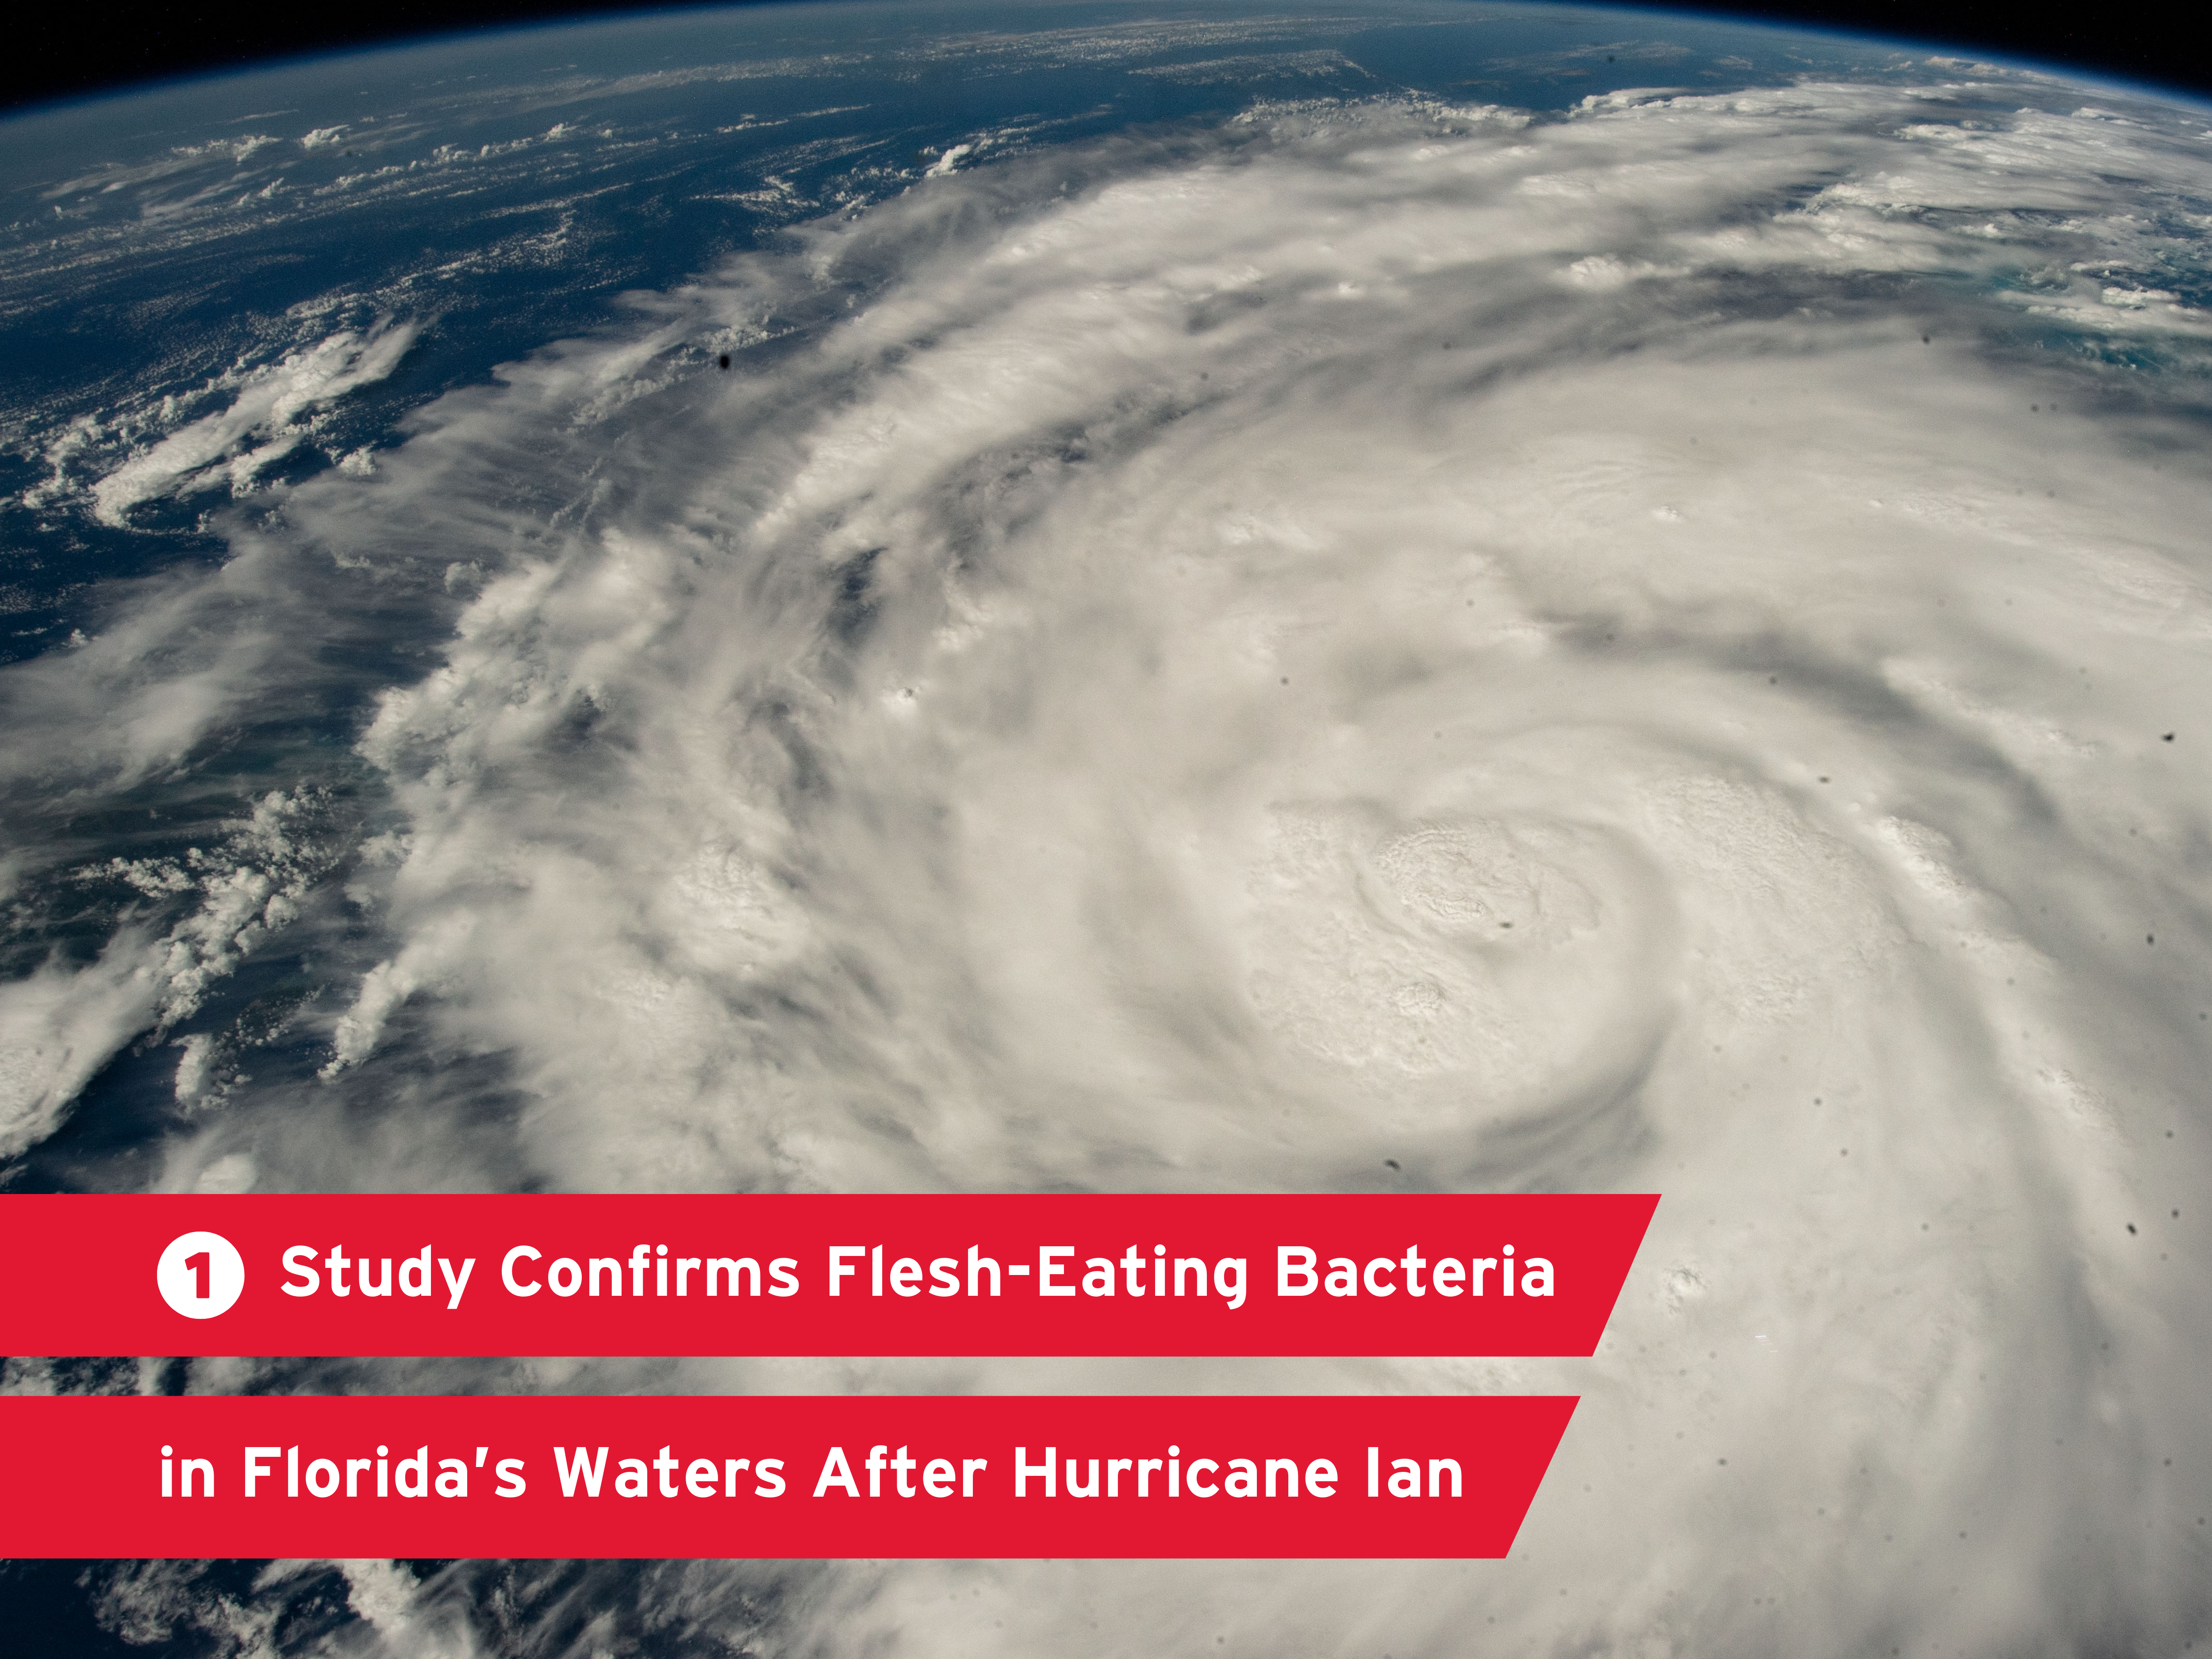 "New Study Confirms Presence of Flesh-Eating and Illness-Causing Bacteria in Florida’s Coastal Waters Following Hurricane Ian" over a background showing a hurricane view from space